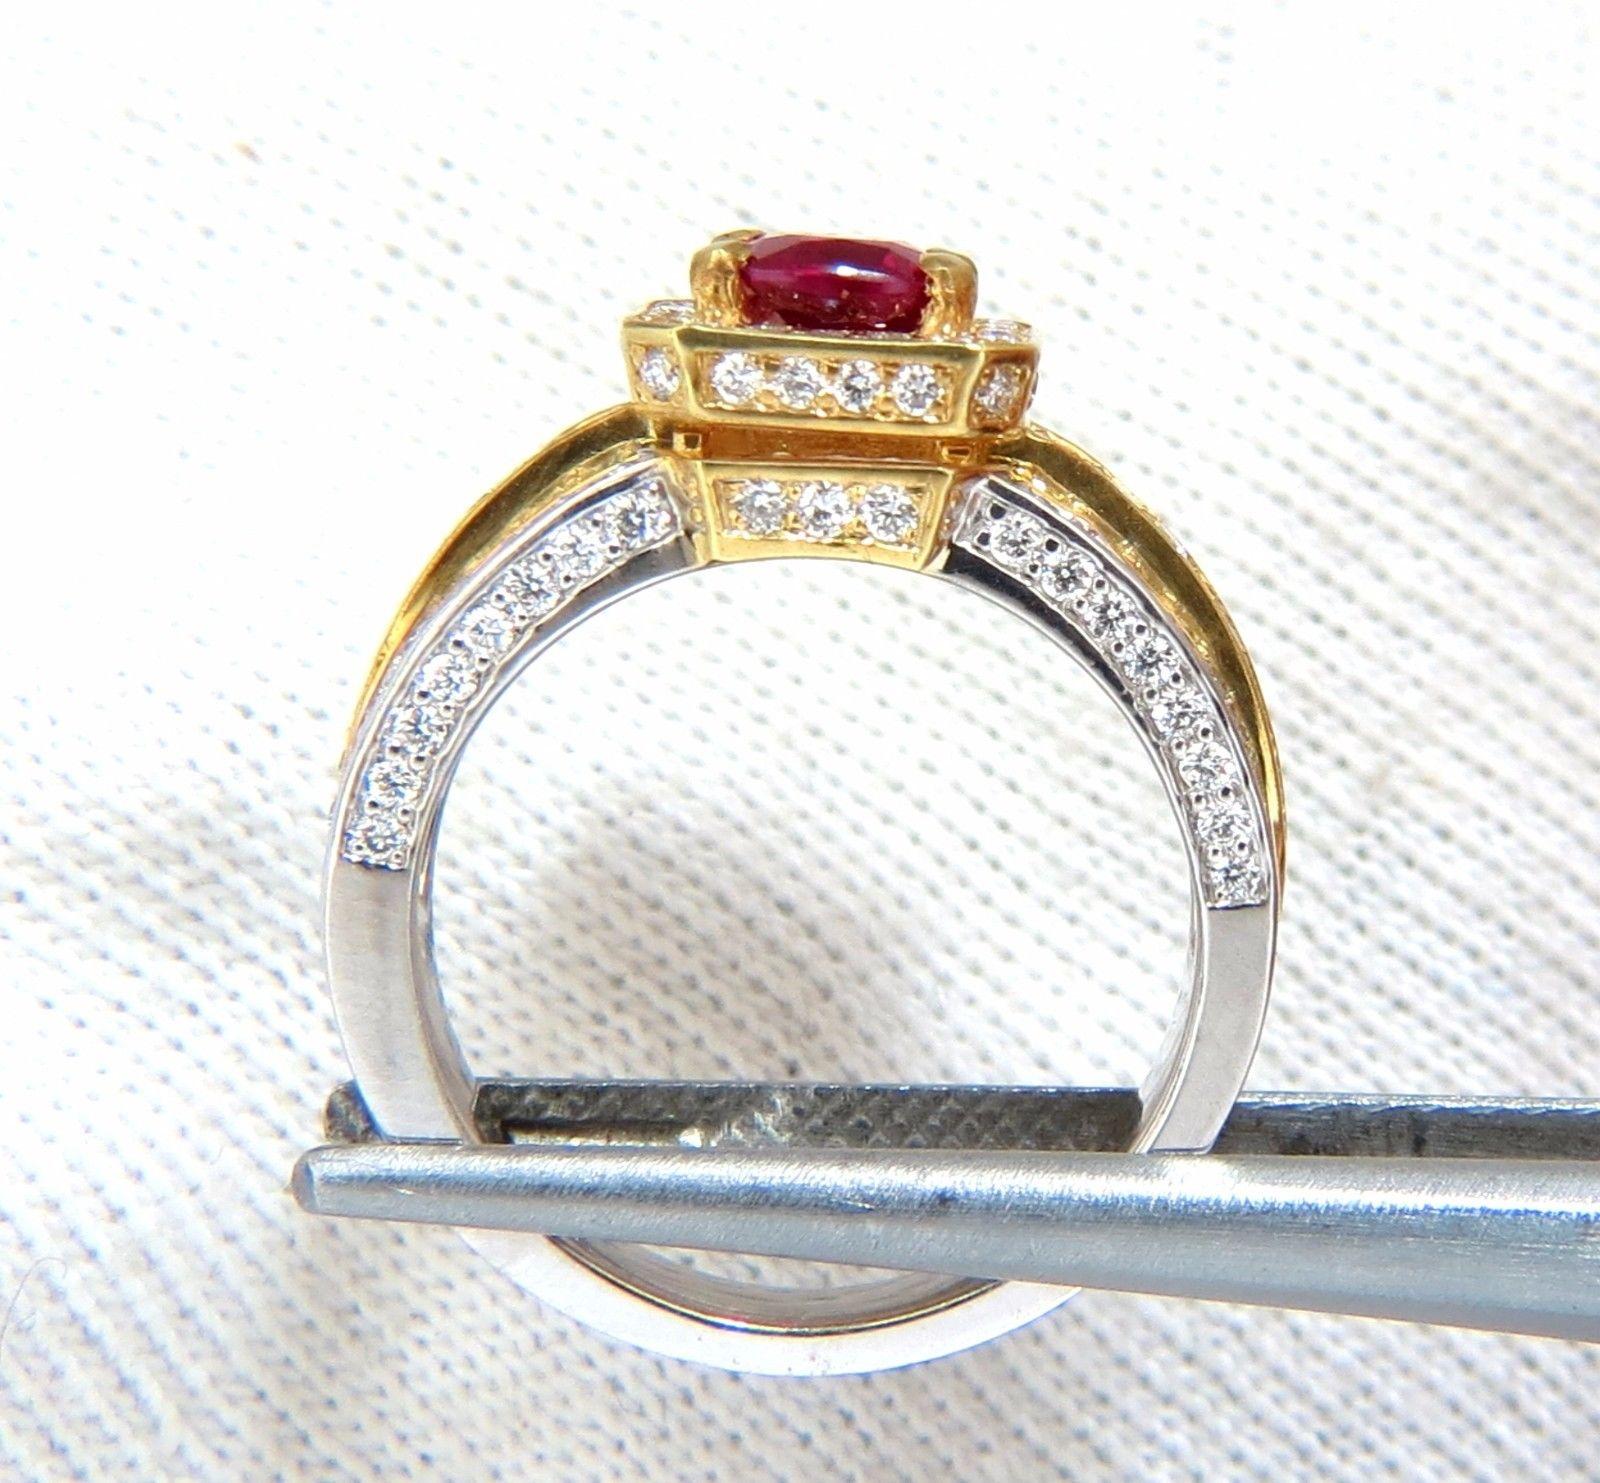 Women's or Men's GIA Certified 2.54 Carat Vivid Red Ruby Diamonds Ring For Sale